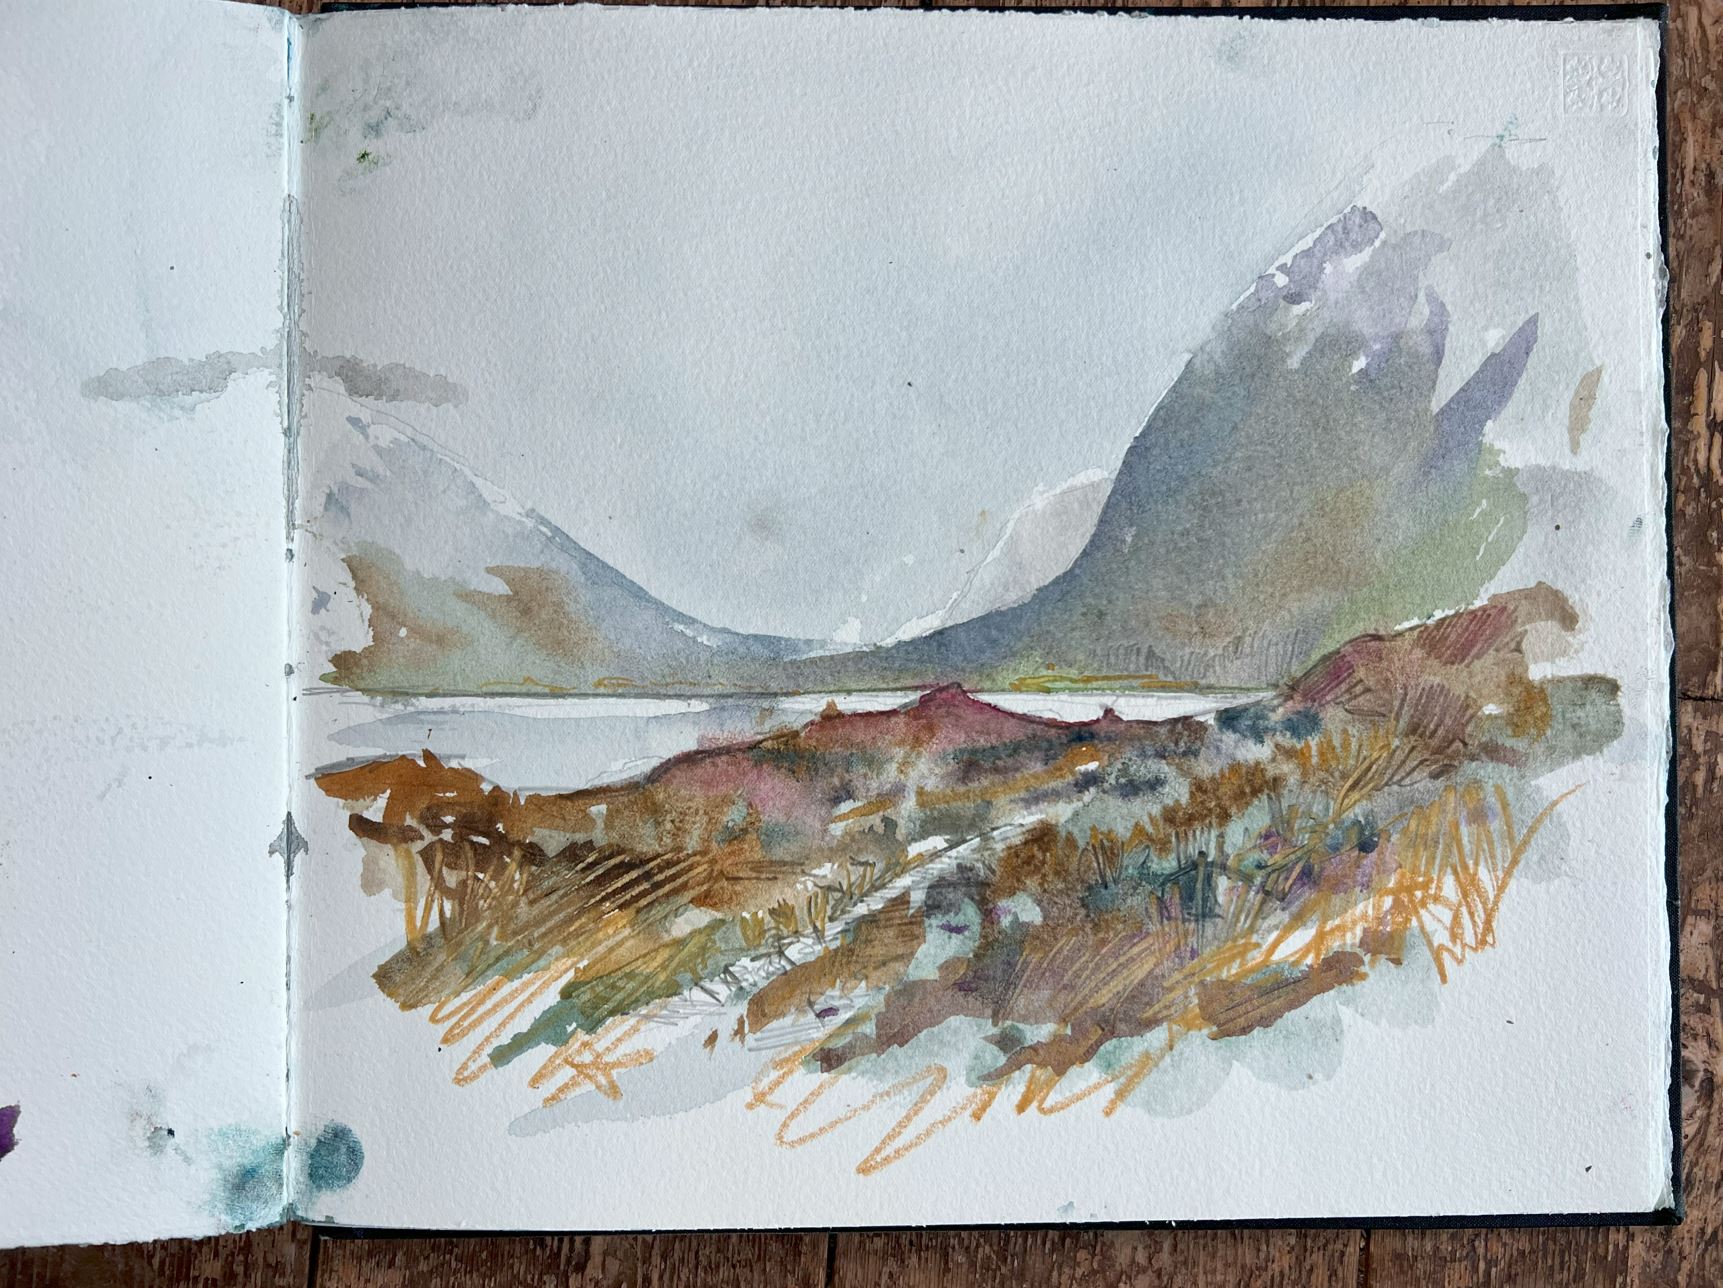 A sketchbook line and watercolour image.